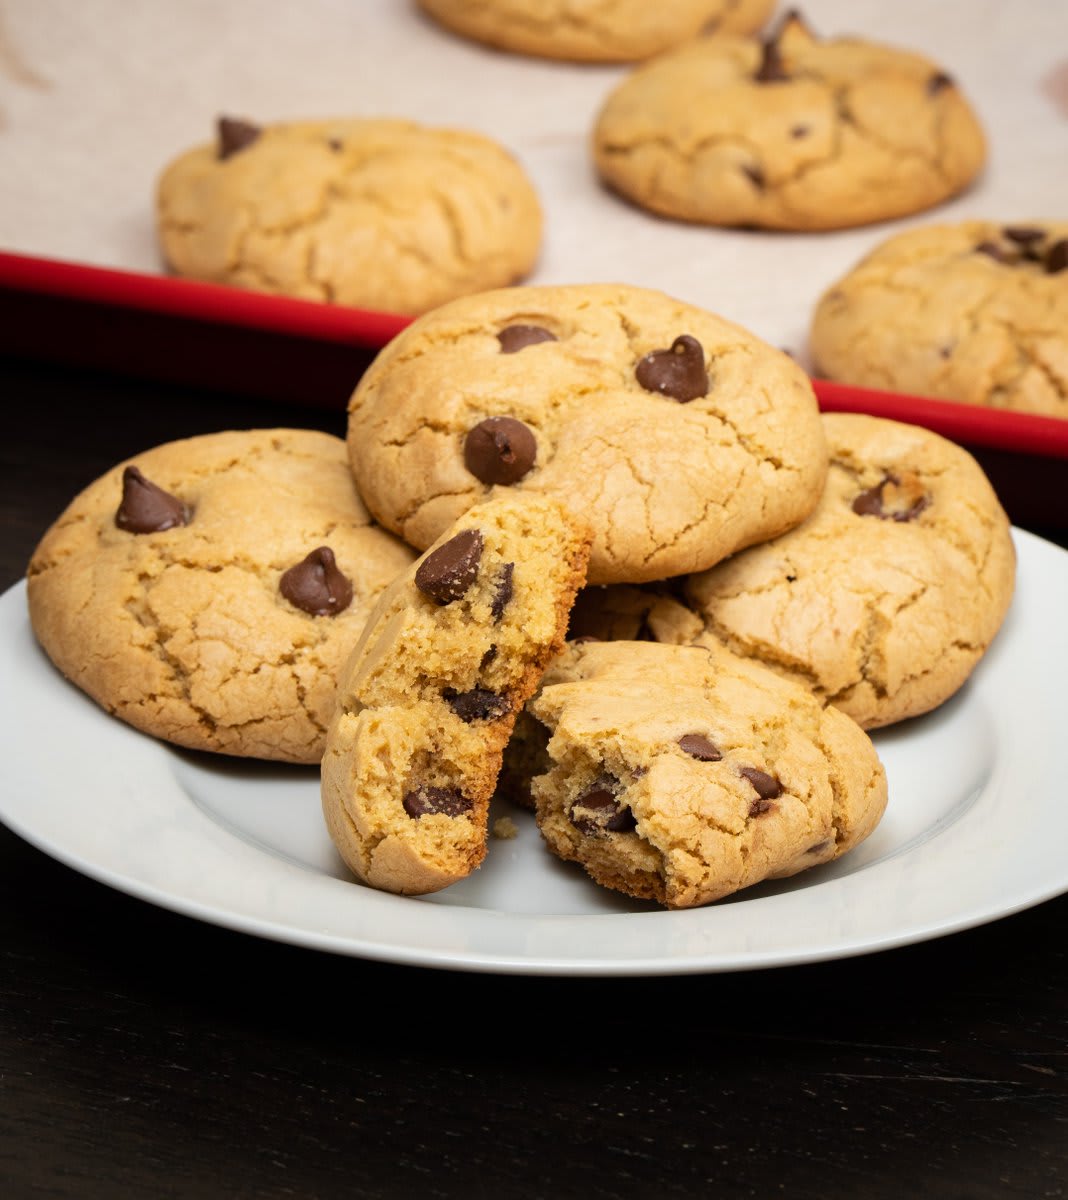 Nathan tried @FoodieInNewYork's olive oil chocolate chunk cookie recipe and "these cookies were chewy on the inside and the perfect amount of crispy around the edges."